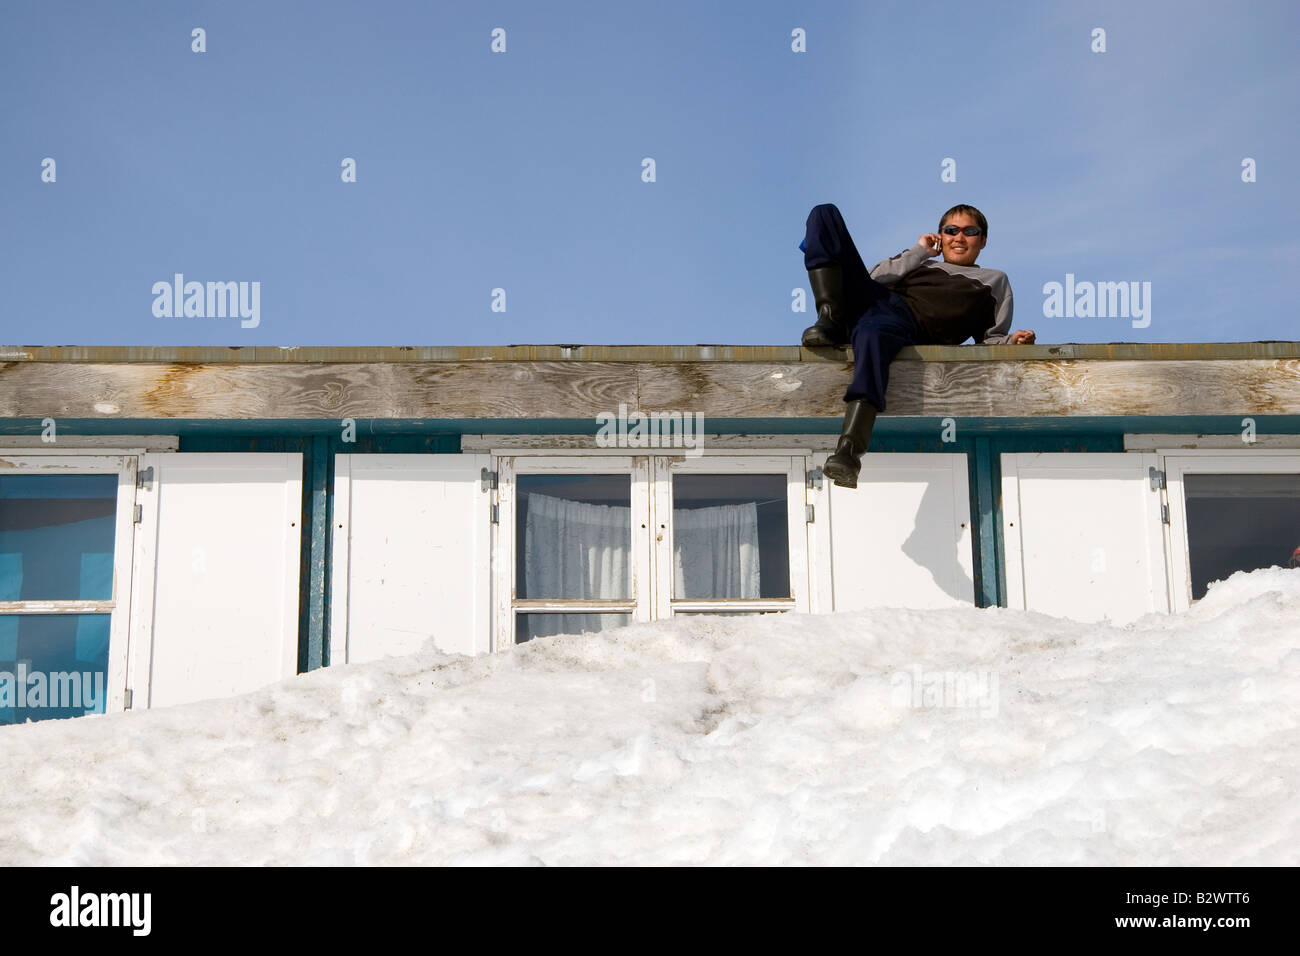 A local Inuit man uses his mobile phone from his roof in the village of Ittoqqortoormiit, Scoresbysund, East Greenland Stock Photo